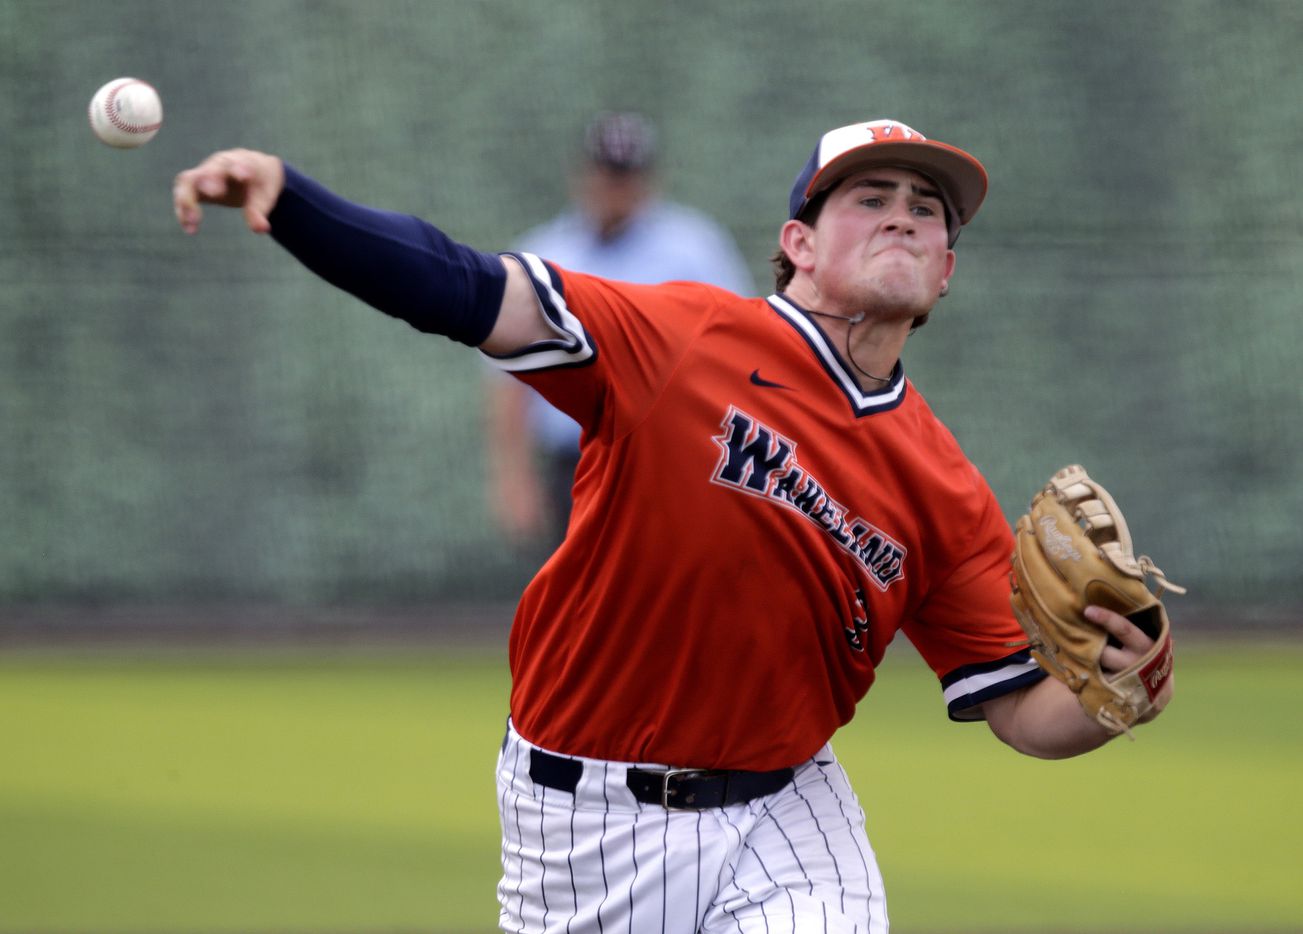 Wakeland High School pitcher Sam Friedman (3) delivers a pitch in the second inning as Reedy...